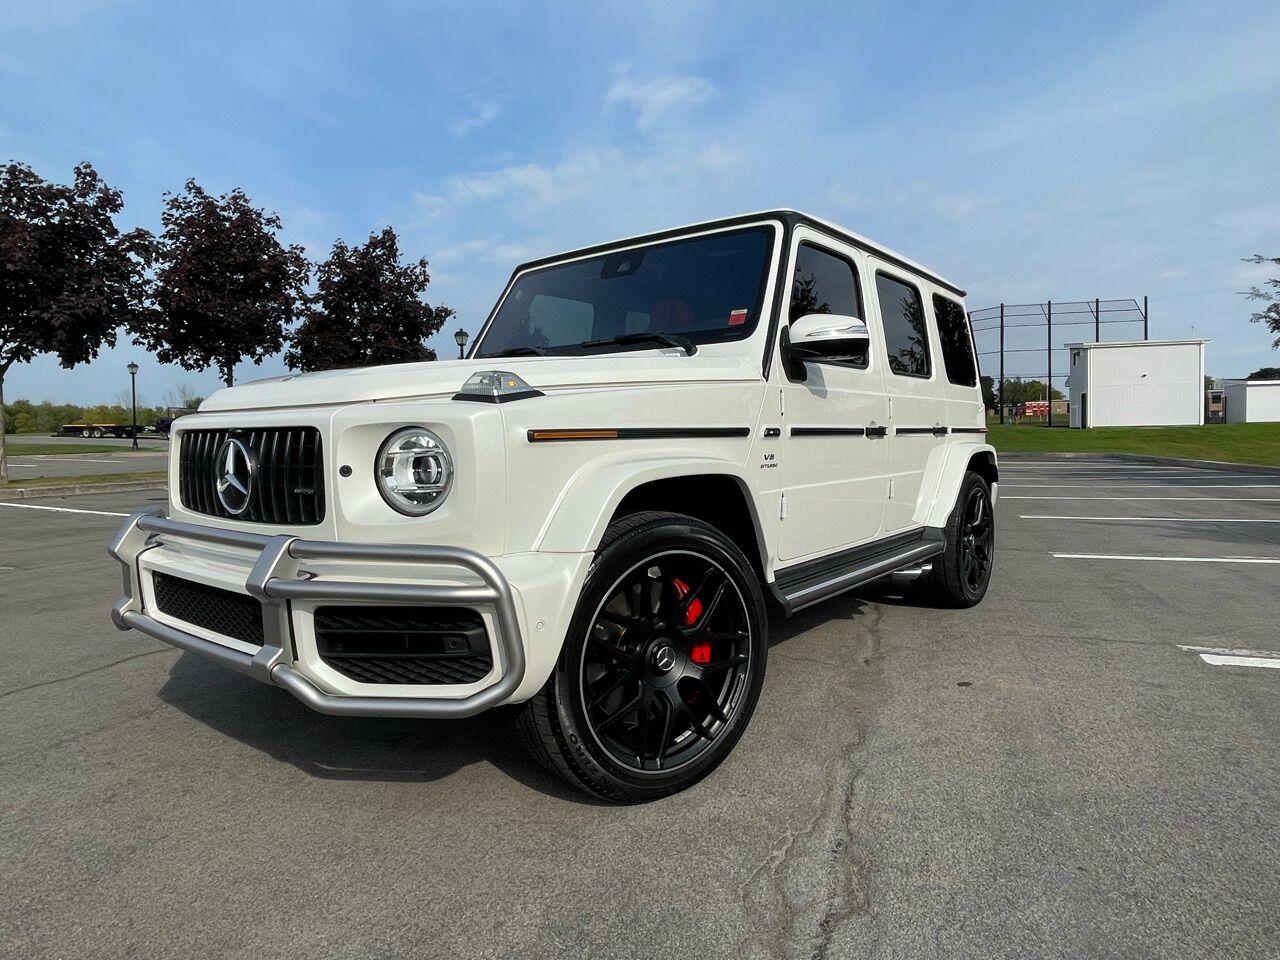 For Sale: 2021 Mercedes-Benz G-Class in Hilton, New York for sale in Hilton, NY